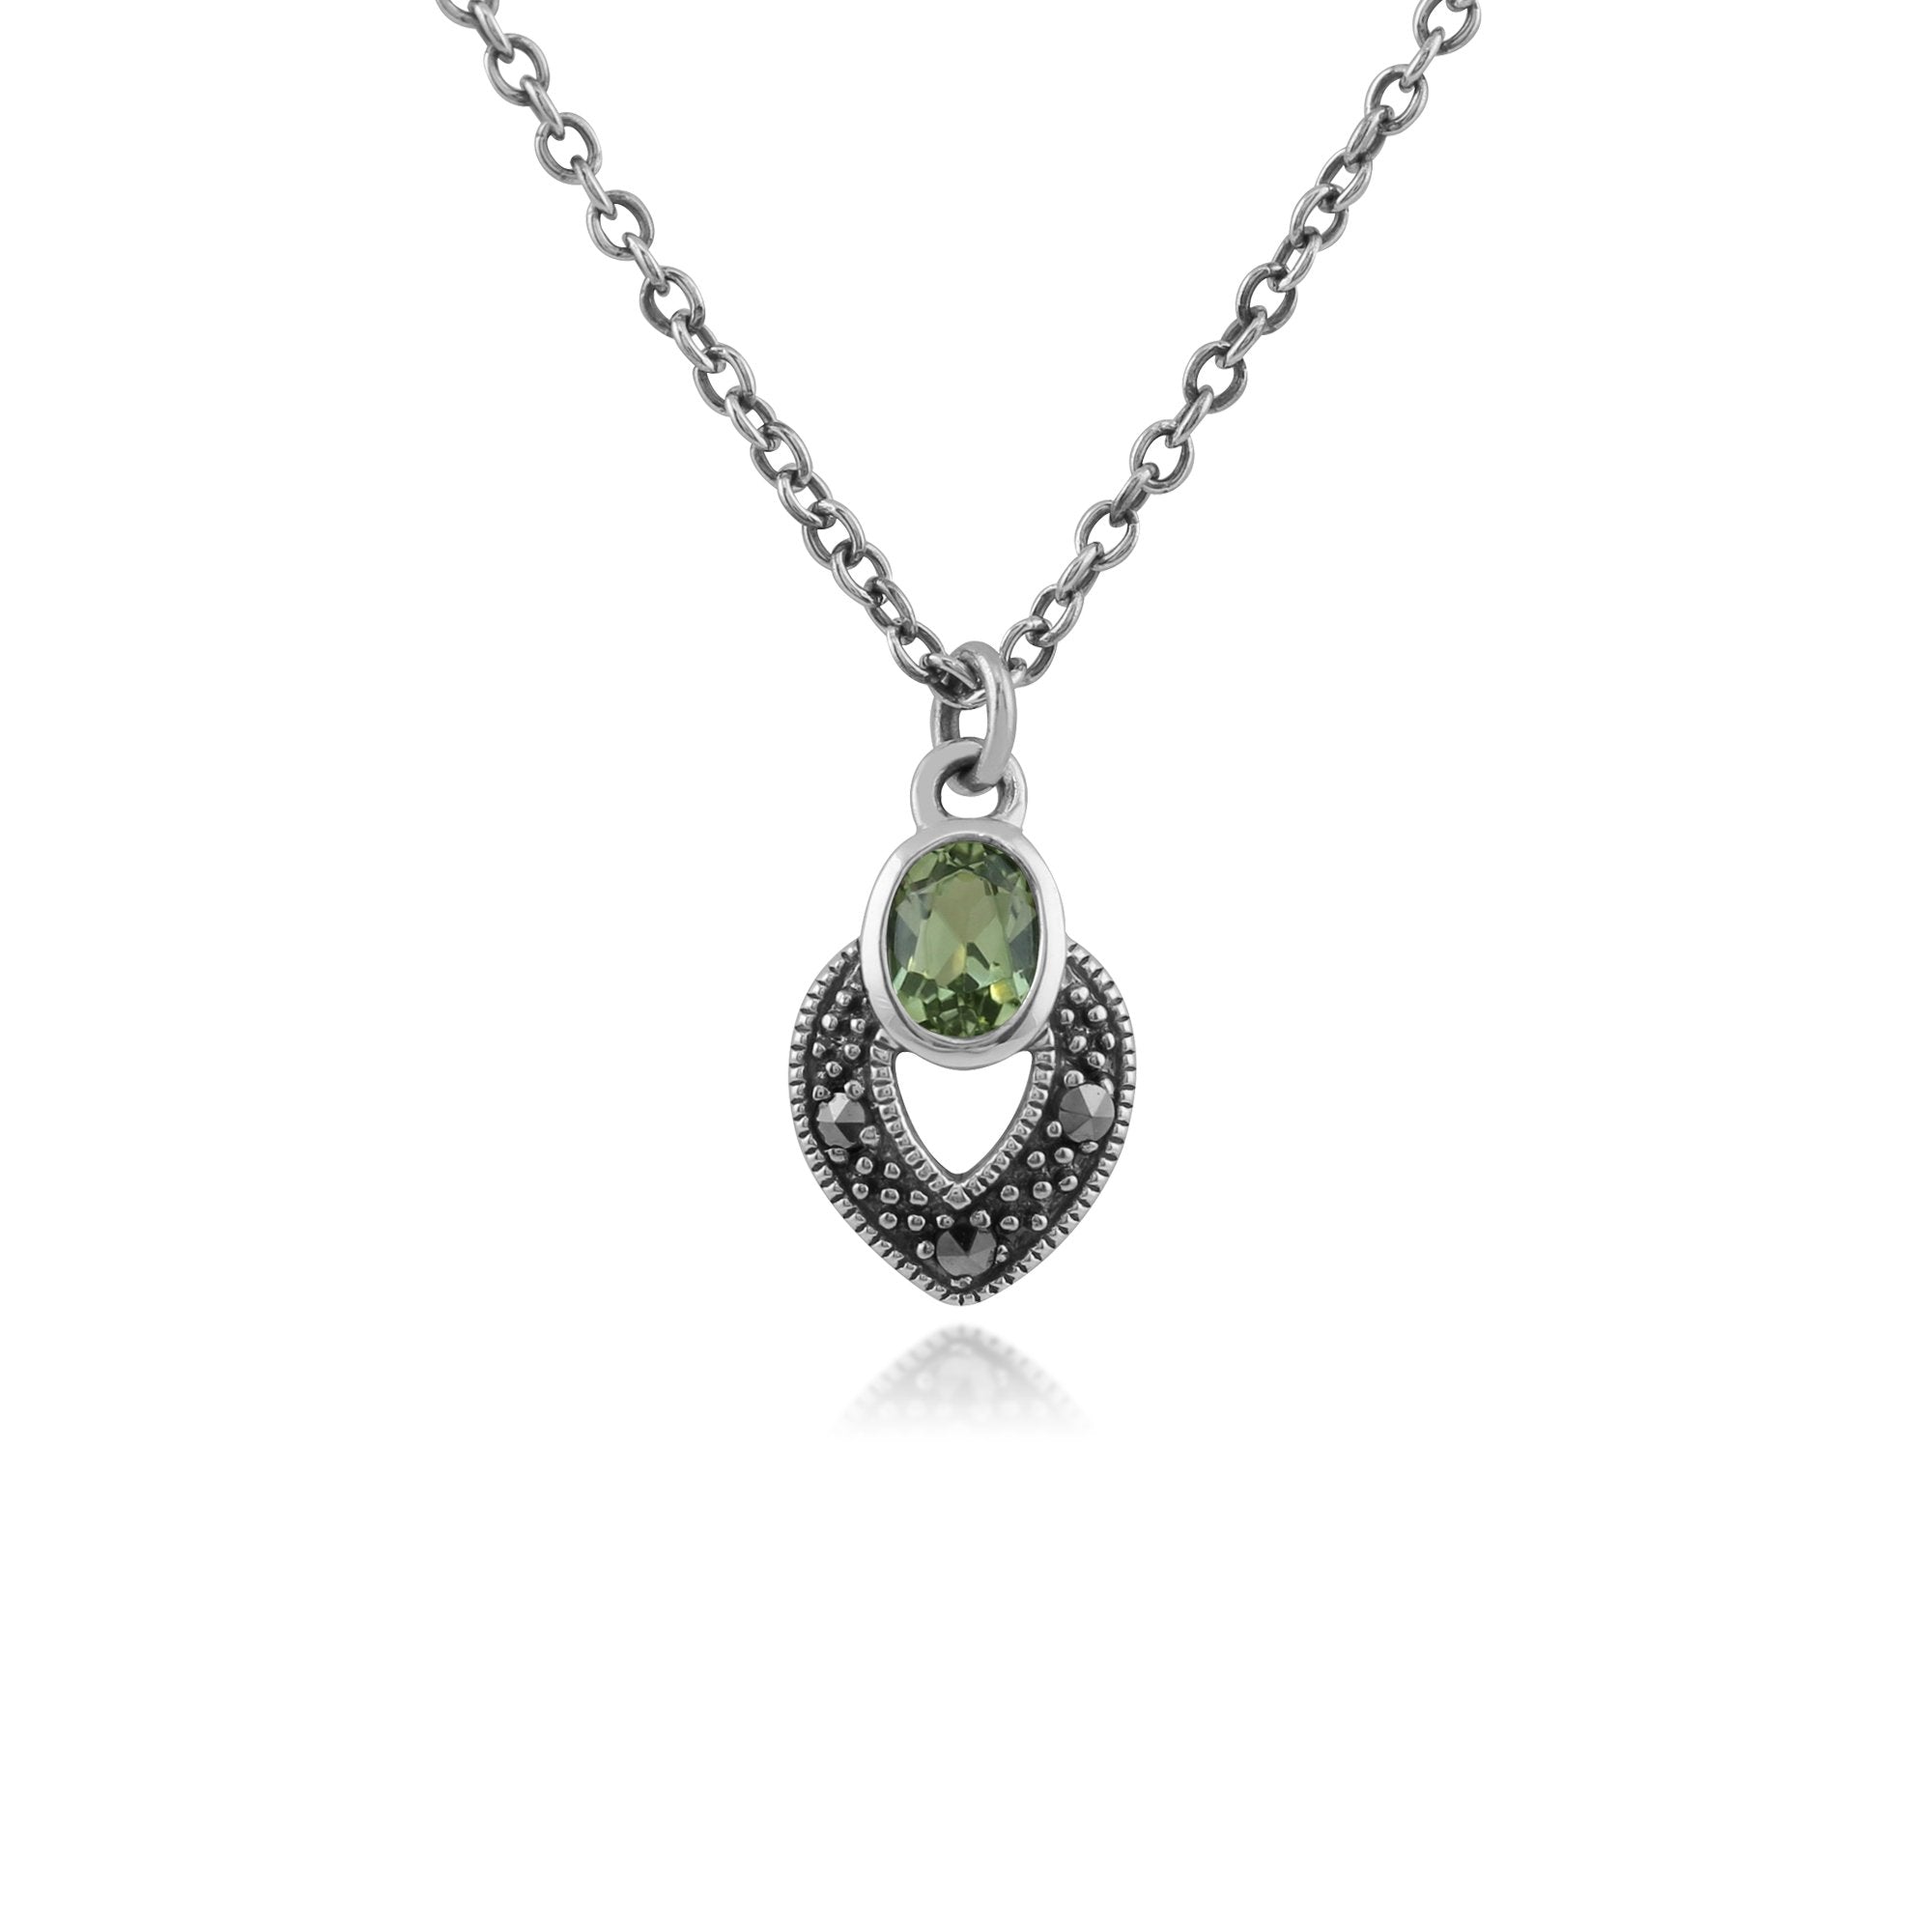 Art Deco Style Oval Peridot & Marcasite Necklace in 925 Sterling Silver